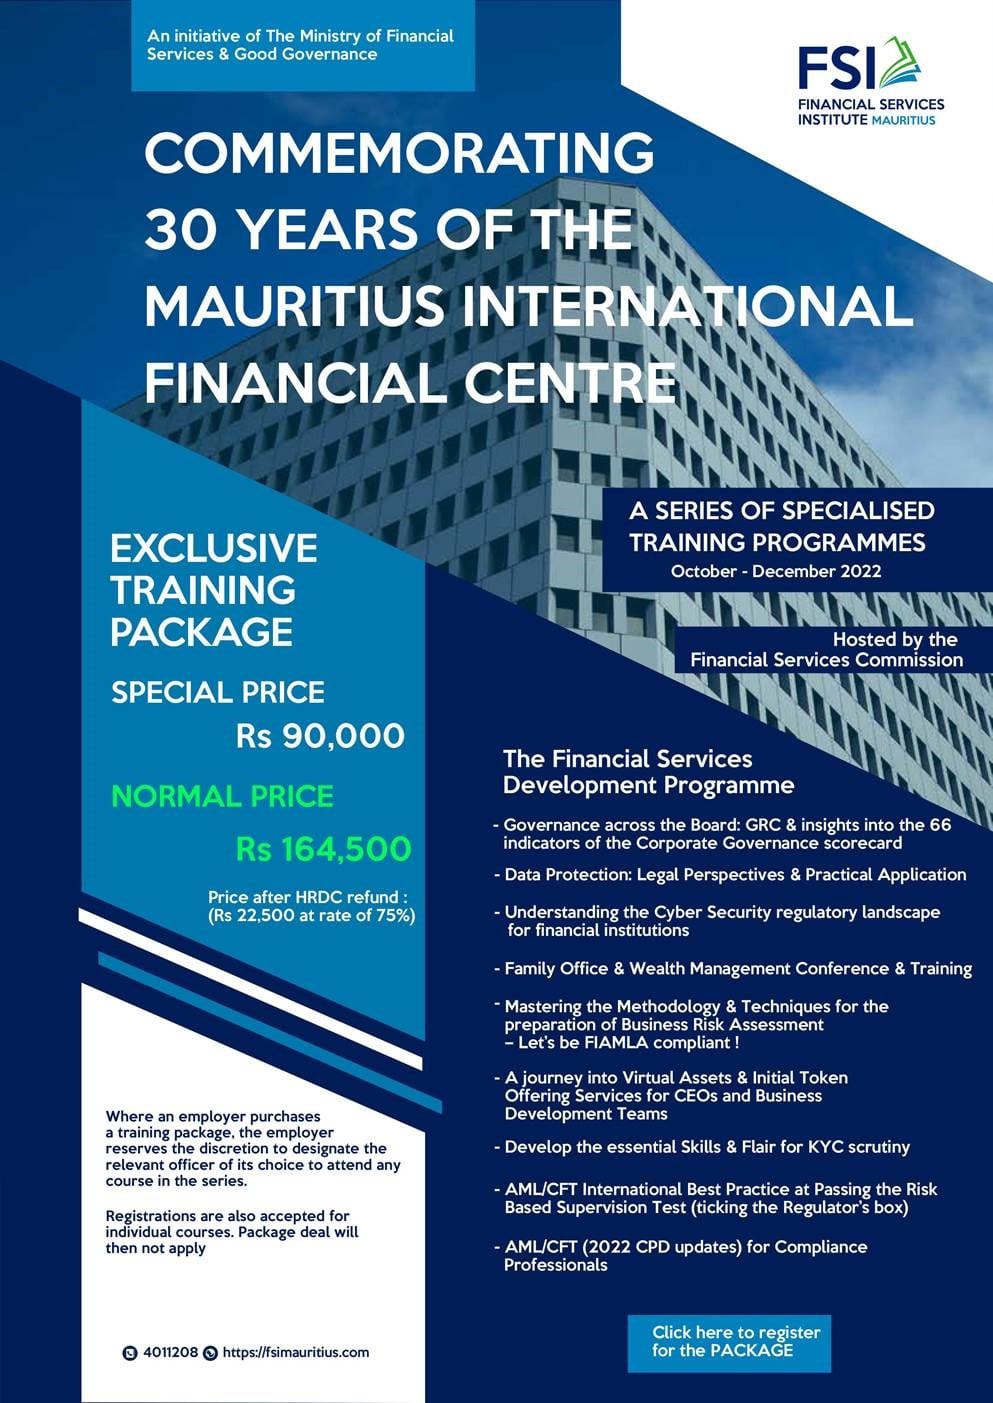 Commemorating 30 years of the Mauritius International Financial Centre